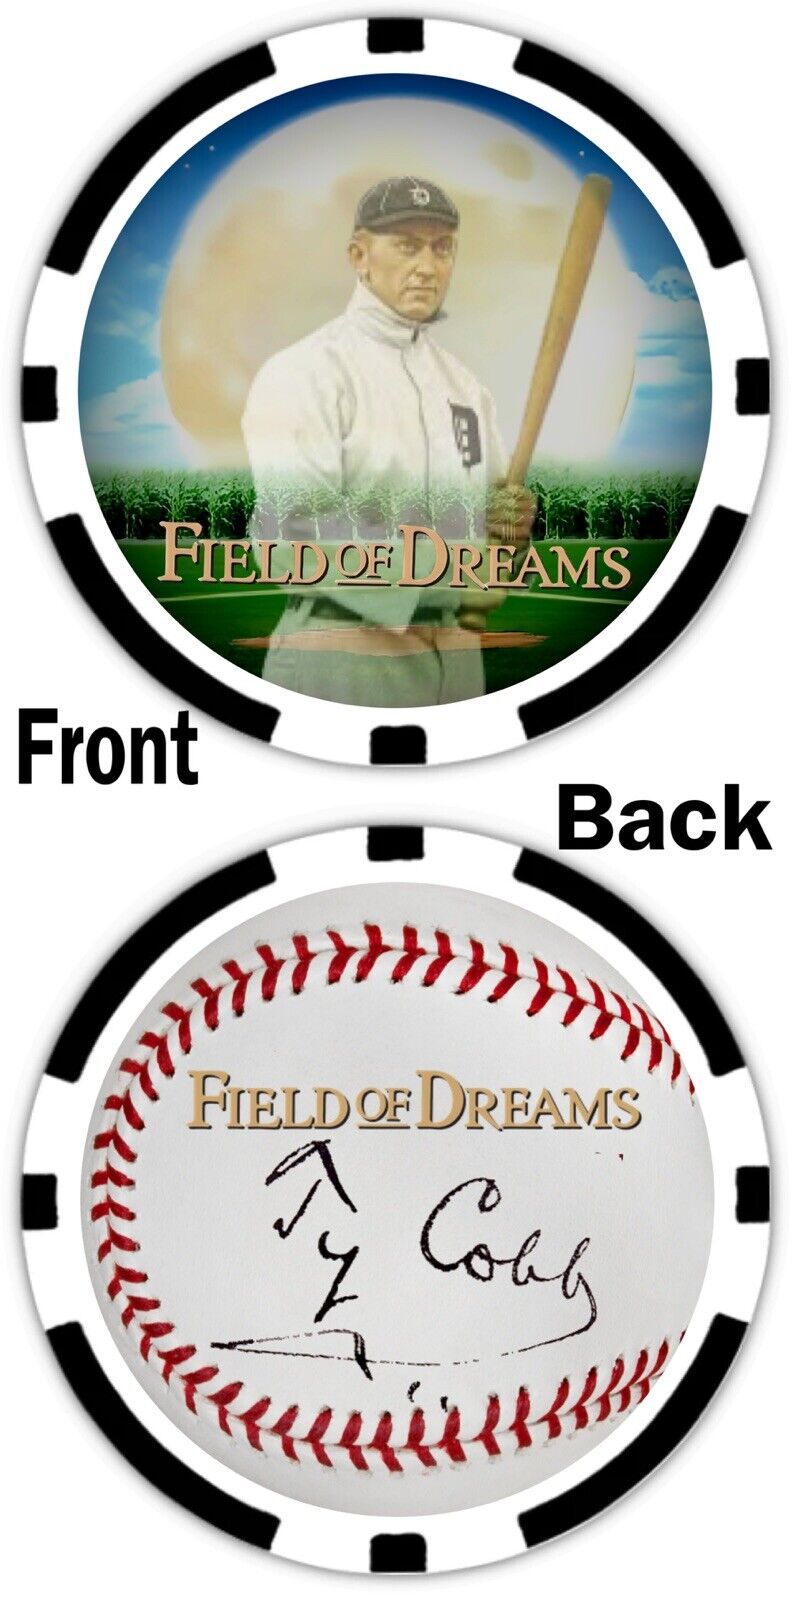 TY COBB - FIELD OF DREAMS - COMMEMORATIVE POKER CHIP ***SIGNED***